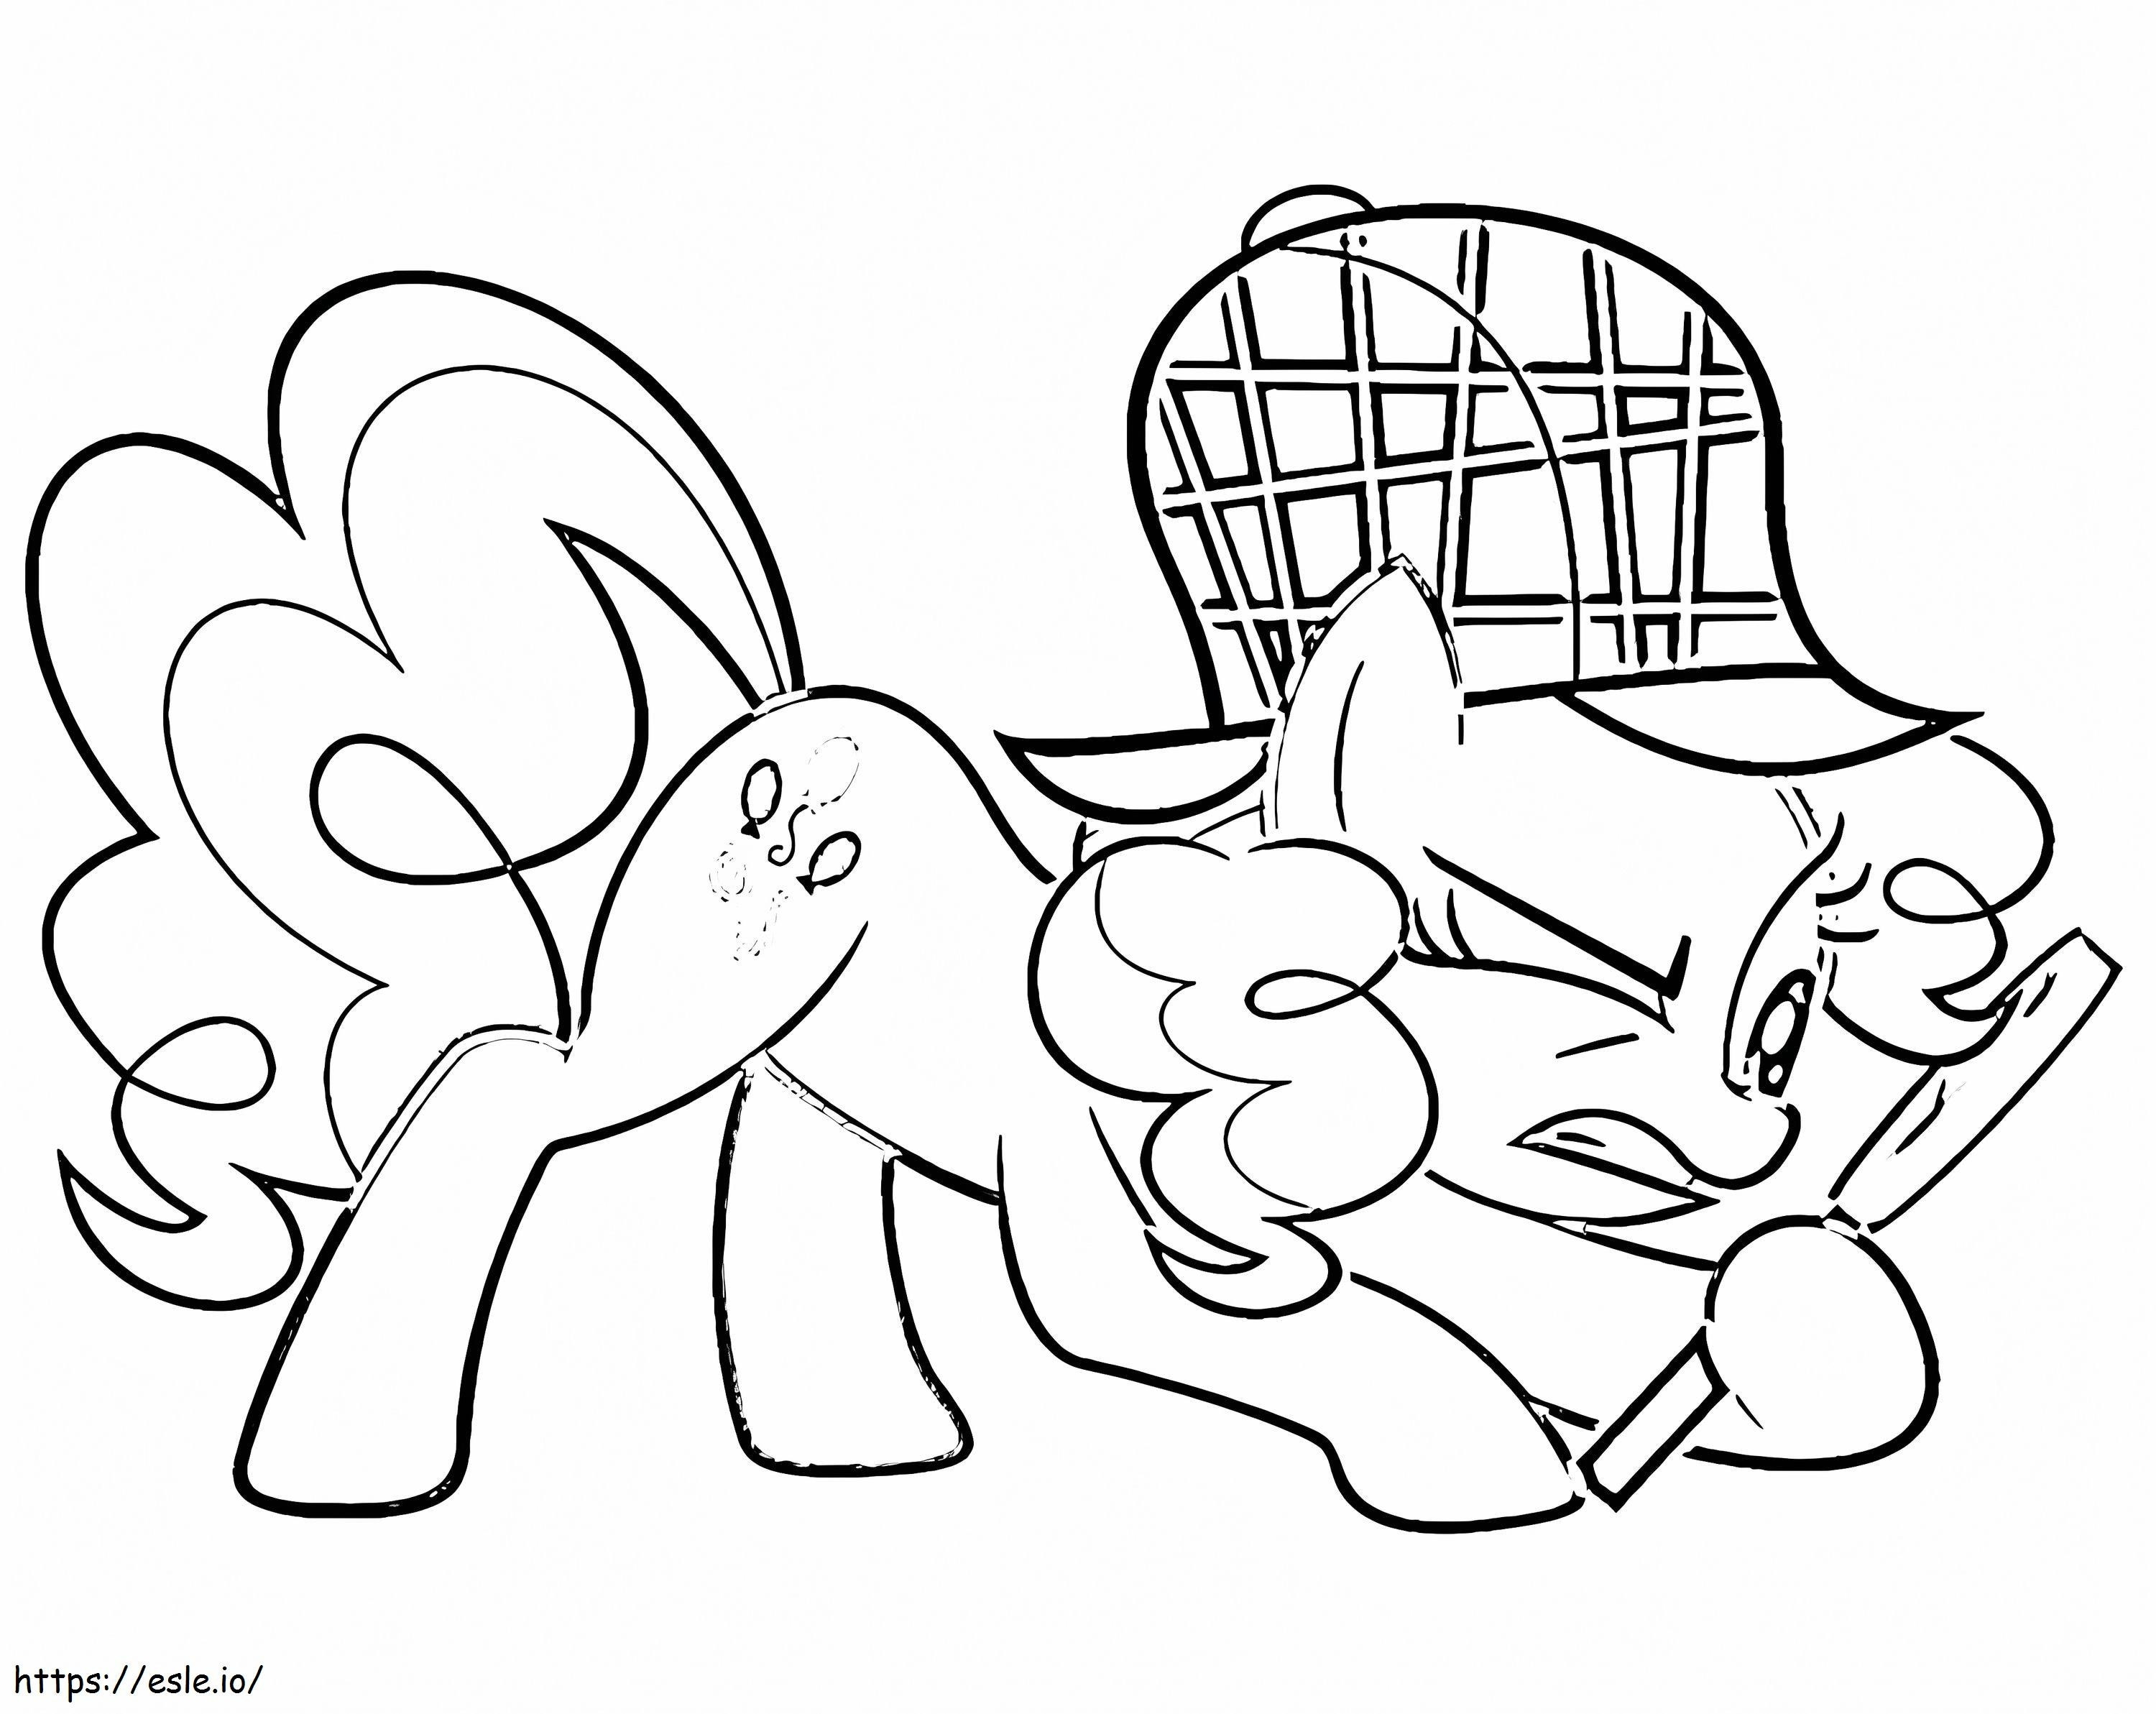 Detective Pinkie Pie coloring page